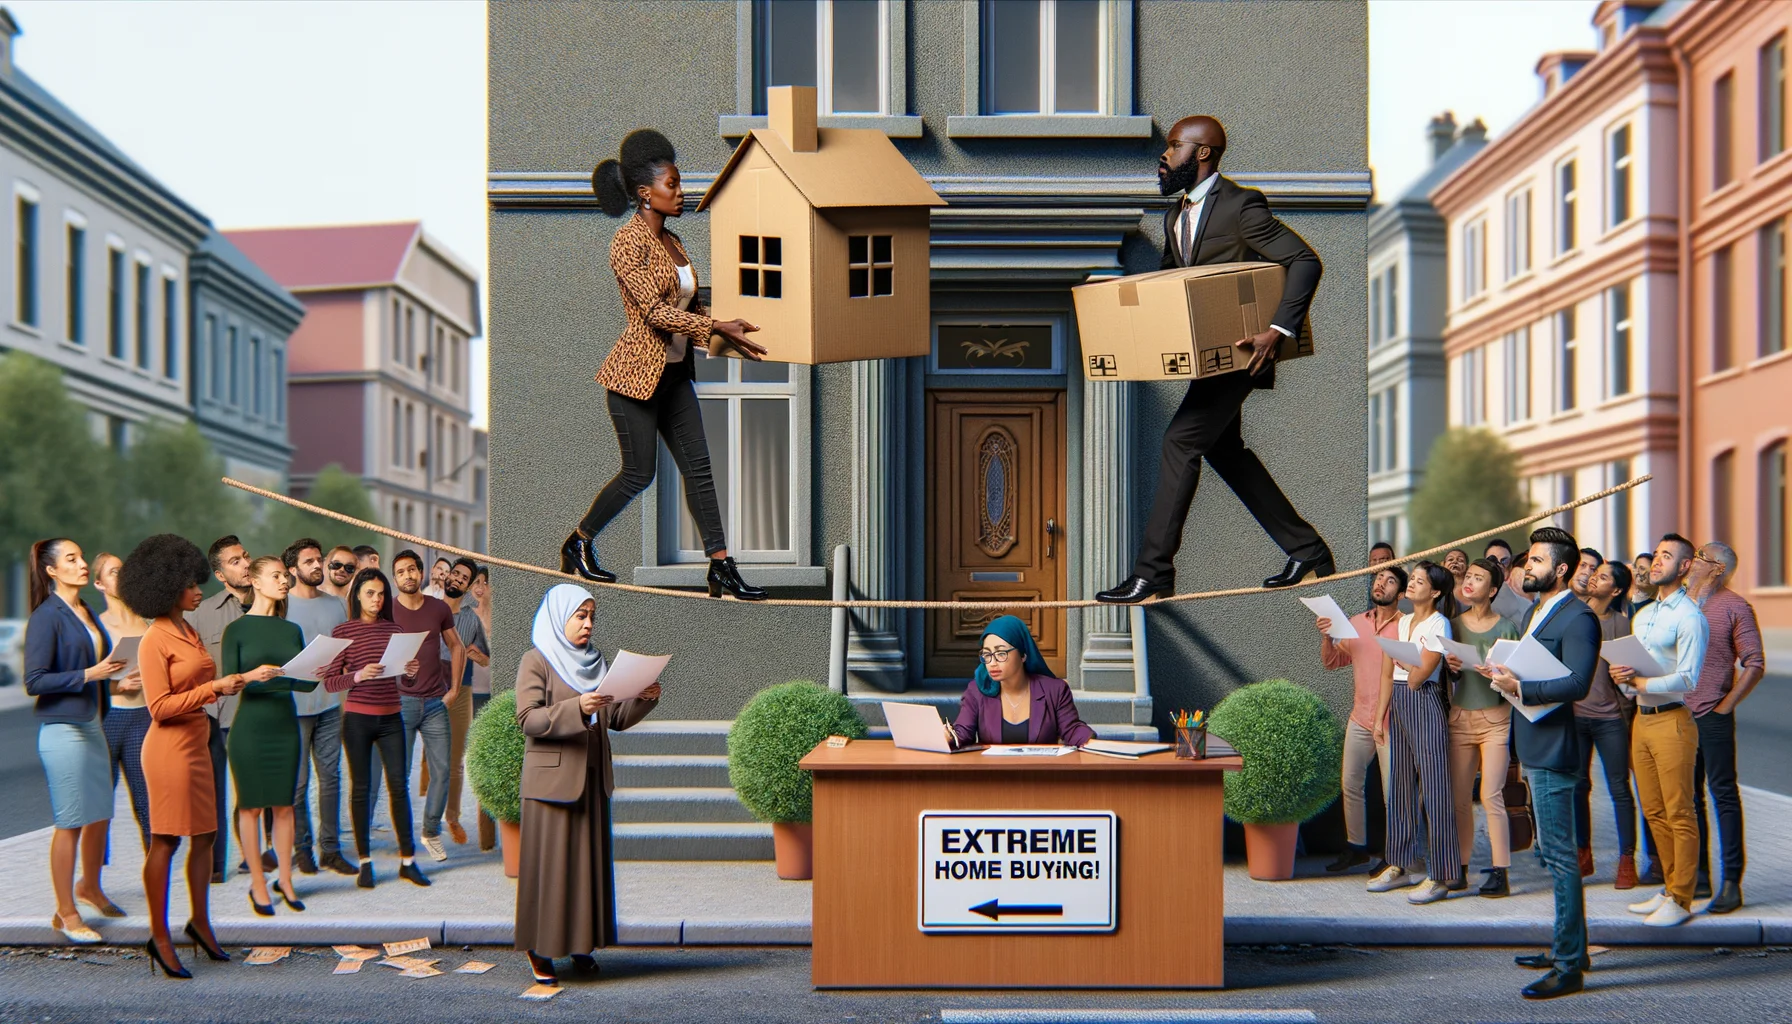 Create a humorous and realistic image of a home buying scenario during a divorce. Picture a Black female and a Hispanic male, both cautiously carrying two halves of a cardboard house, symbolizing a divided asset. They're both walking on a tightrope above an estate agent's office, clutching onto each other out of necessity. The agent, a Middle-Eastern woman, is below them, juggling sale contracts. There's a crowd of multiracial spectators, all chuckling at the absurdity of the situation. The sign outside the office reads 'Extreme Home Buying!' to add a light-hearted touch.